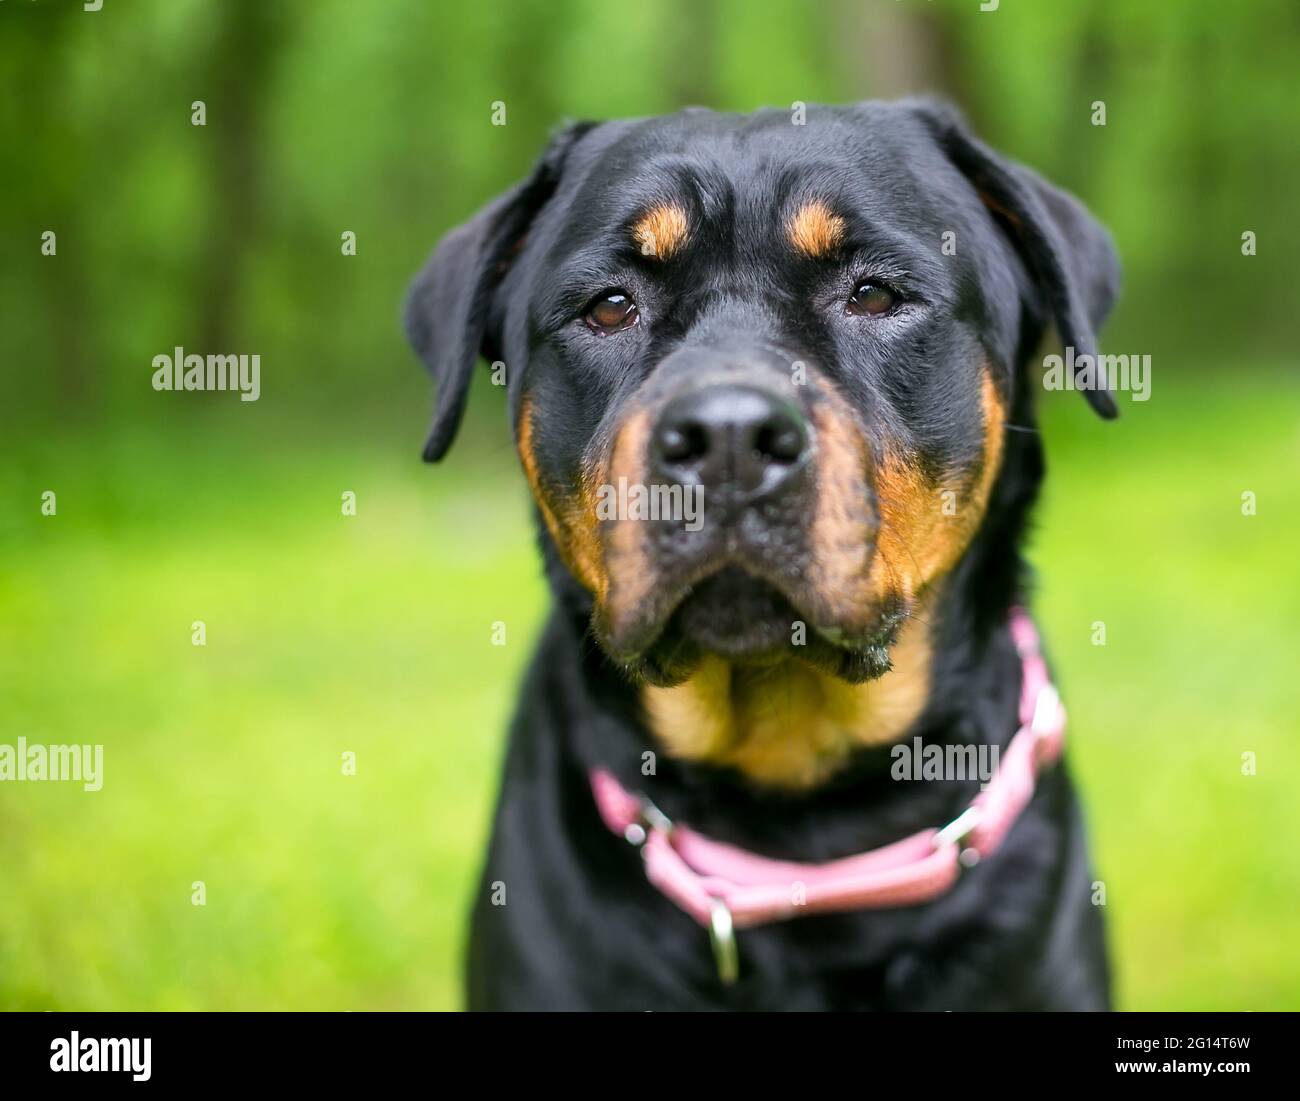 A purebred Rottweiler dog wearing a pink collar outdoors Stock Photo